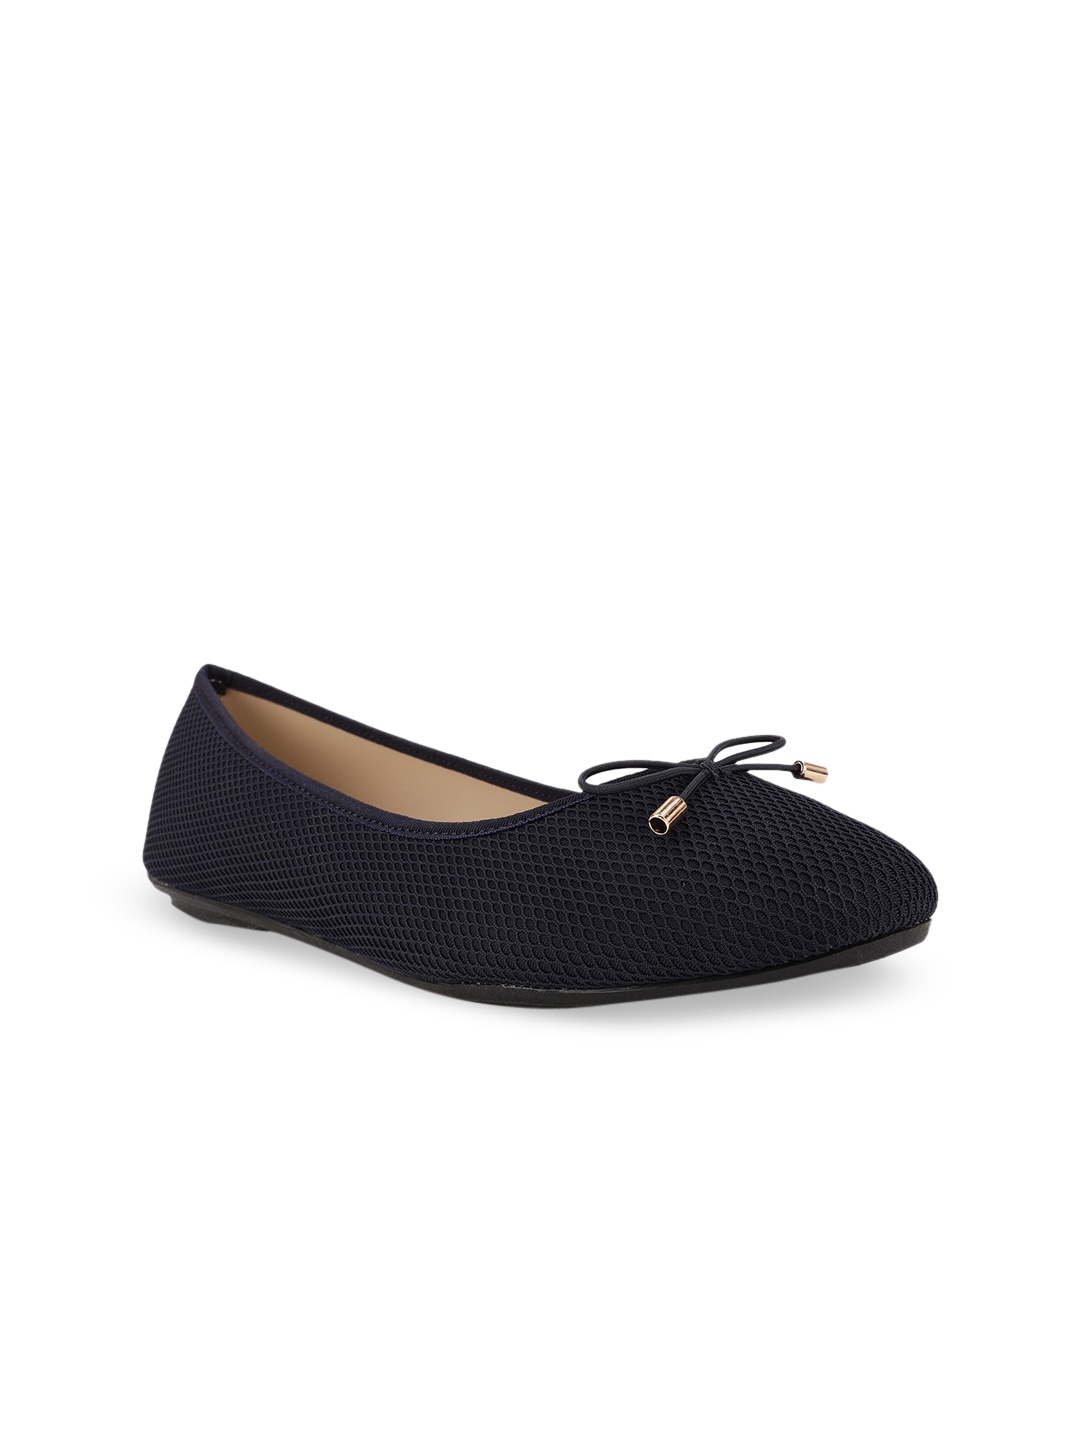 Bata Women Navy Blue Ballerinas with Bows Flats Price in India